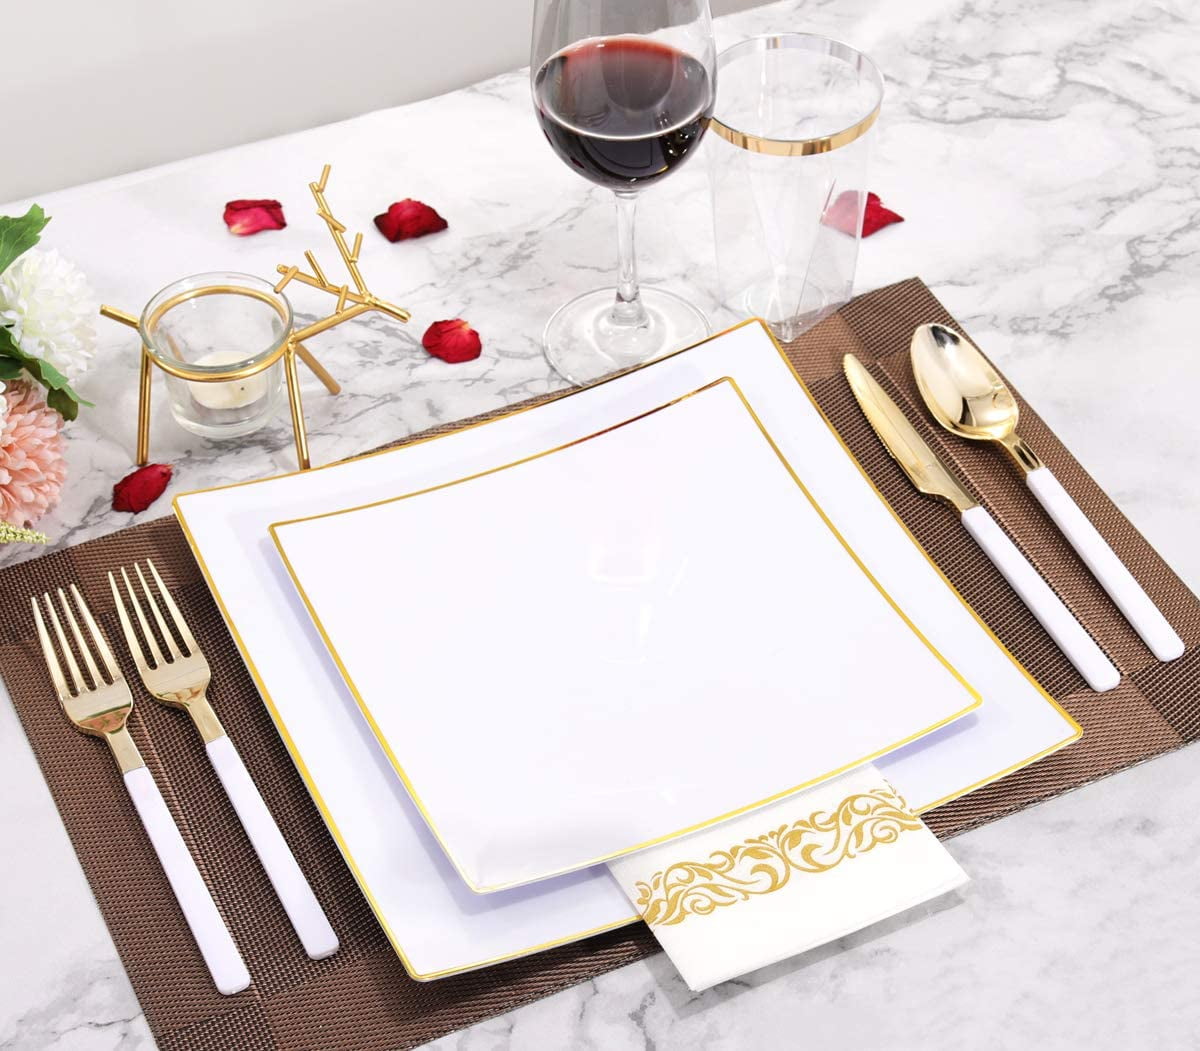 20 Cups 20 Napkins for Thanksgiving & Parties Nervure 140Pcs White Square Plastic Plates with Gold Rim 60 Gold Plastic Silverware with White Handle Gold Disposable Plates Includes: 40 plates 